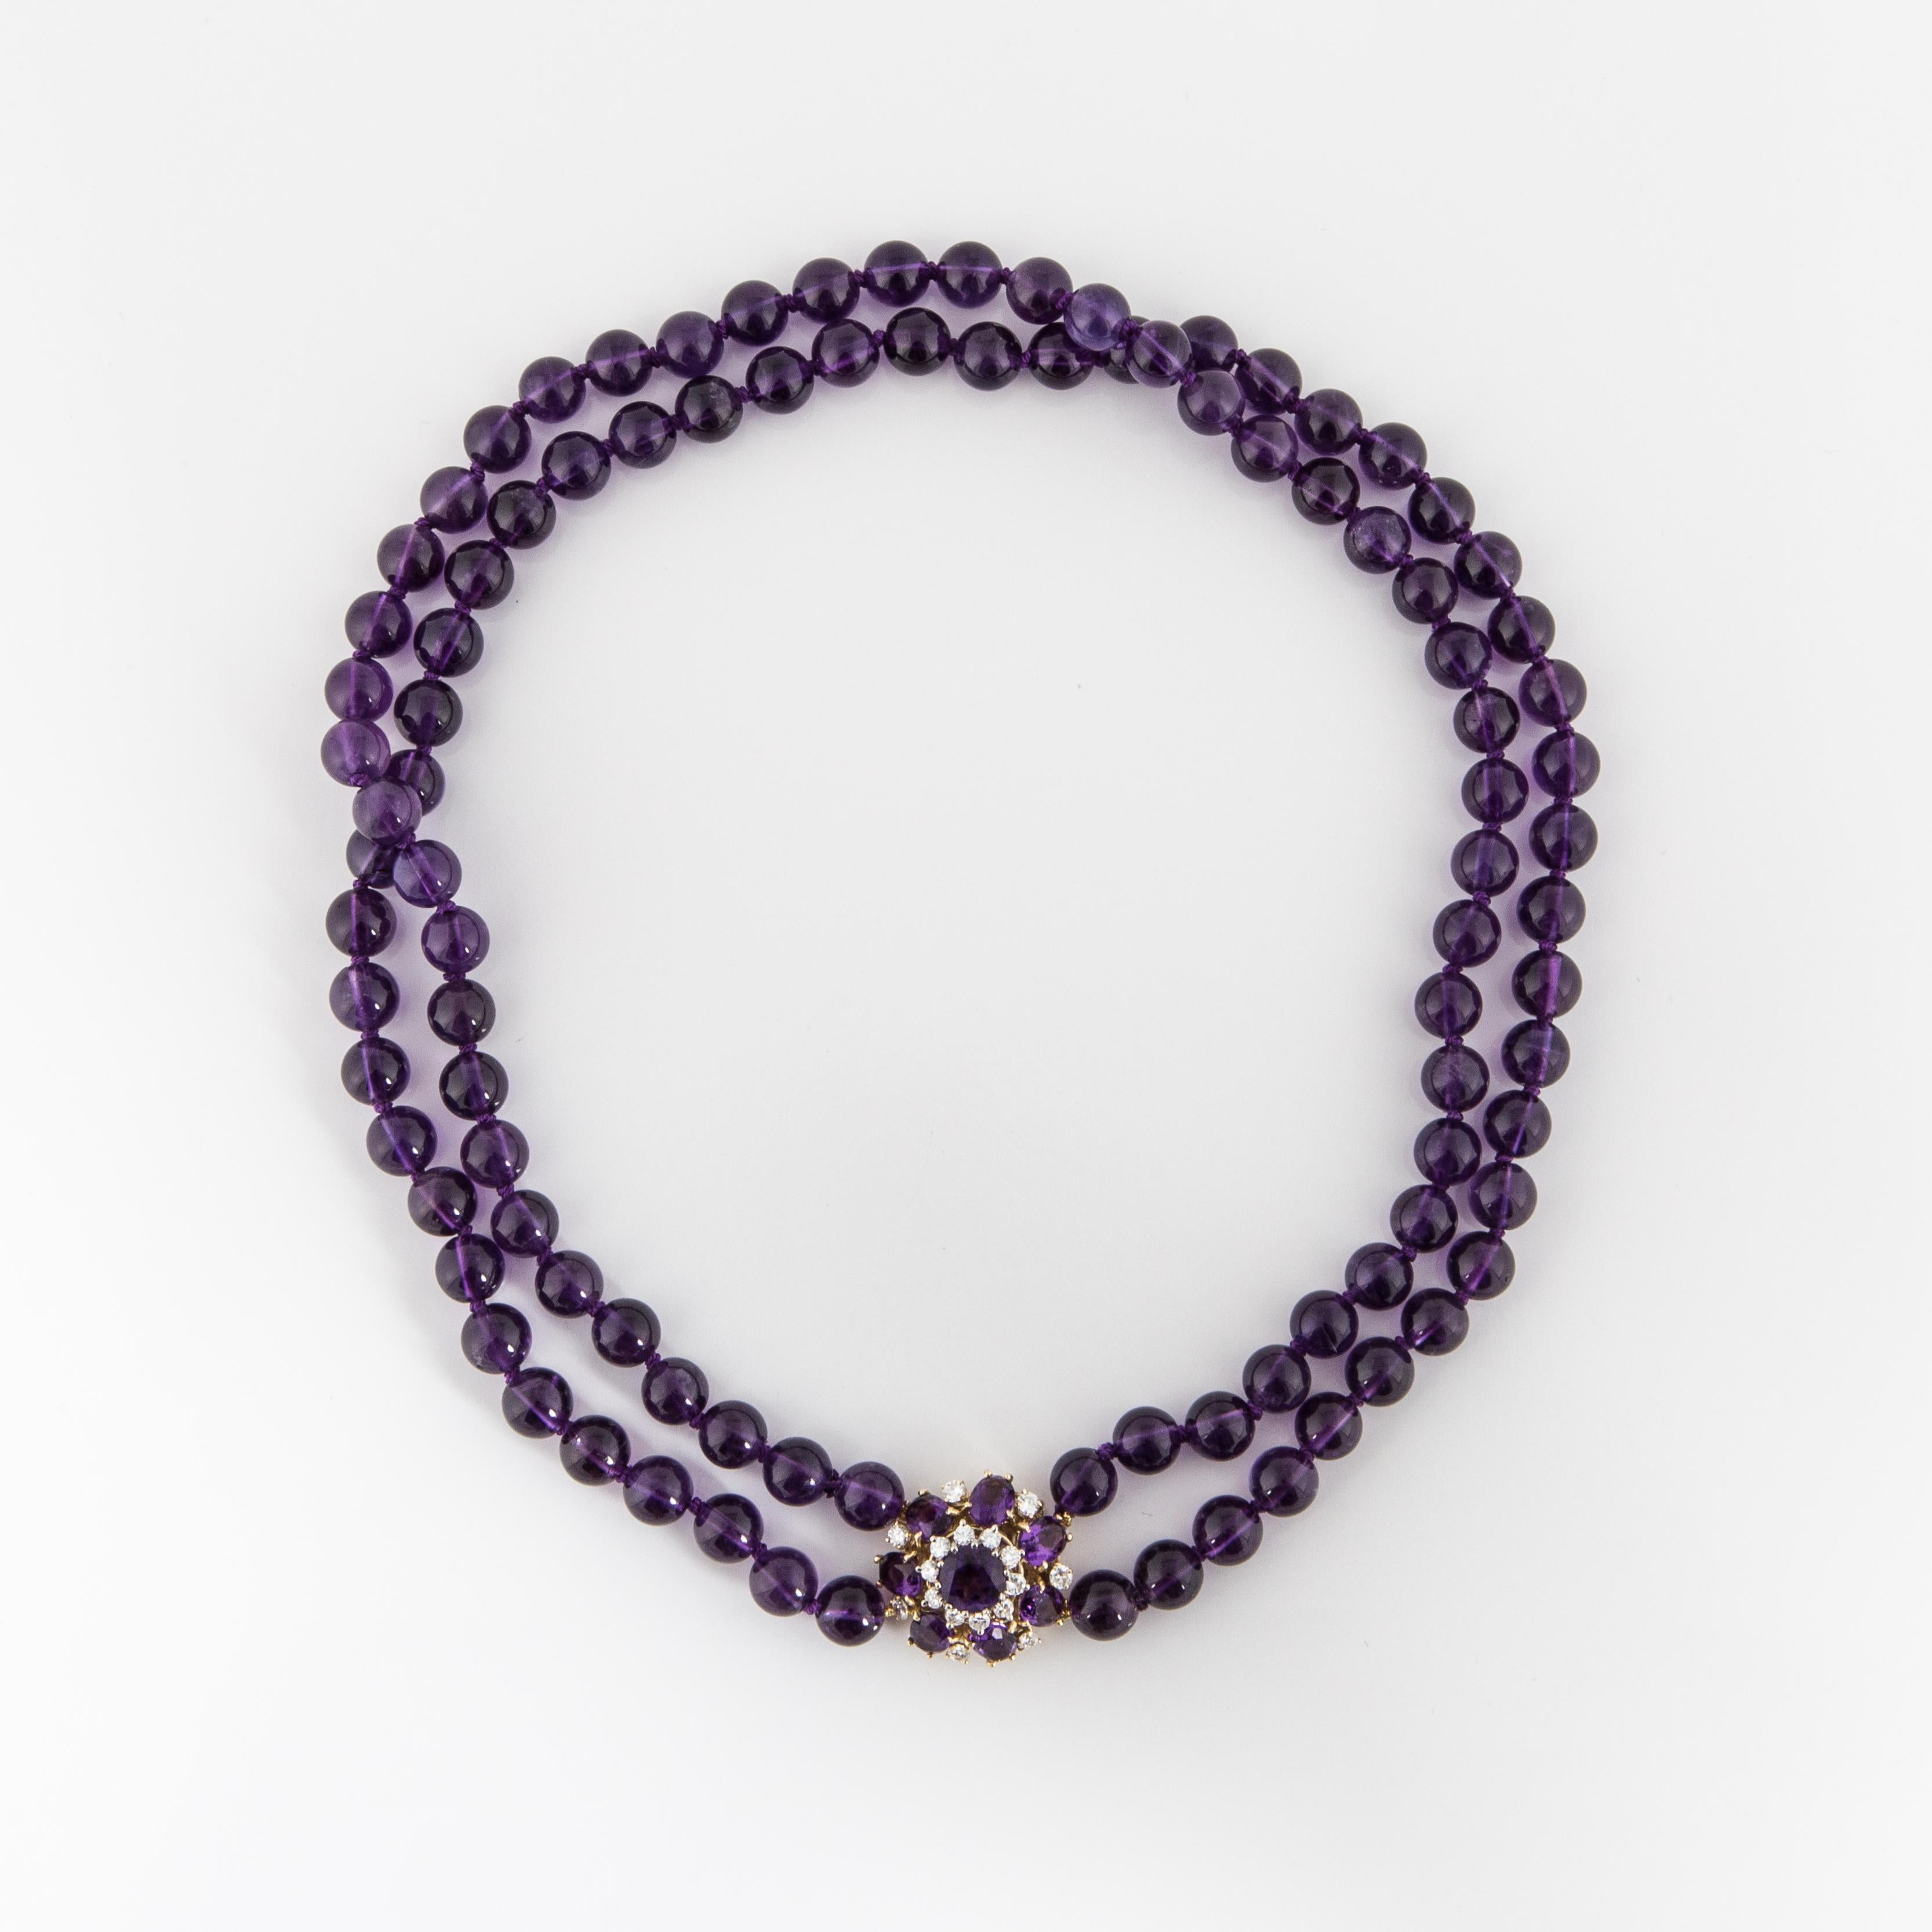 Amethyst bead double-strand necklace with 18K yellow gold diamond and amethyst clasp.  There are 100 amethyst beads measuring 8mm.  The clasp contains 7 oval amethysts that total 7 carats framing 1 round amethyst that totals 1.75 carats and 17 round